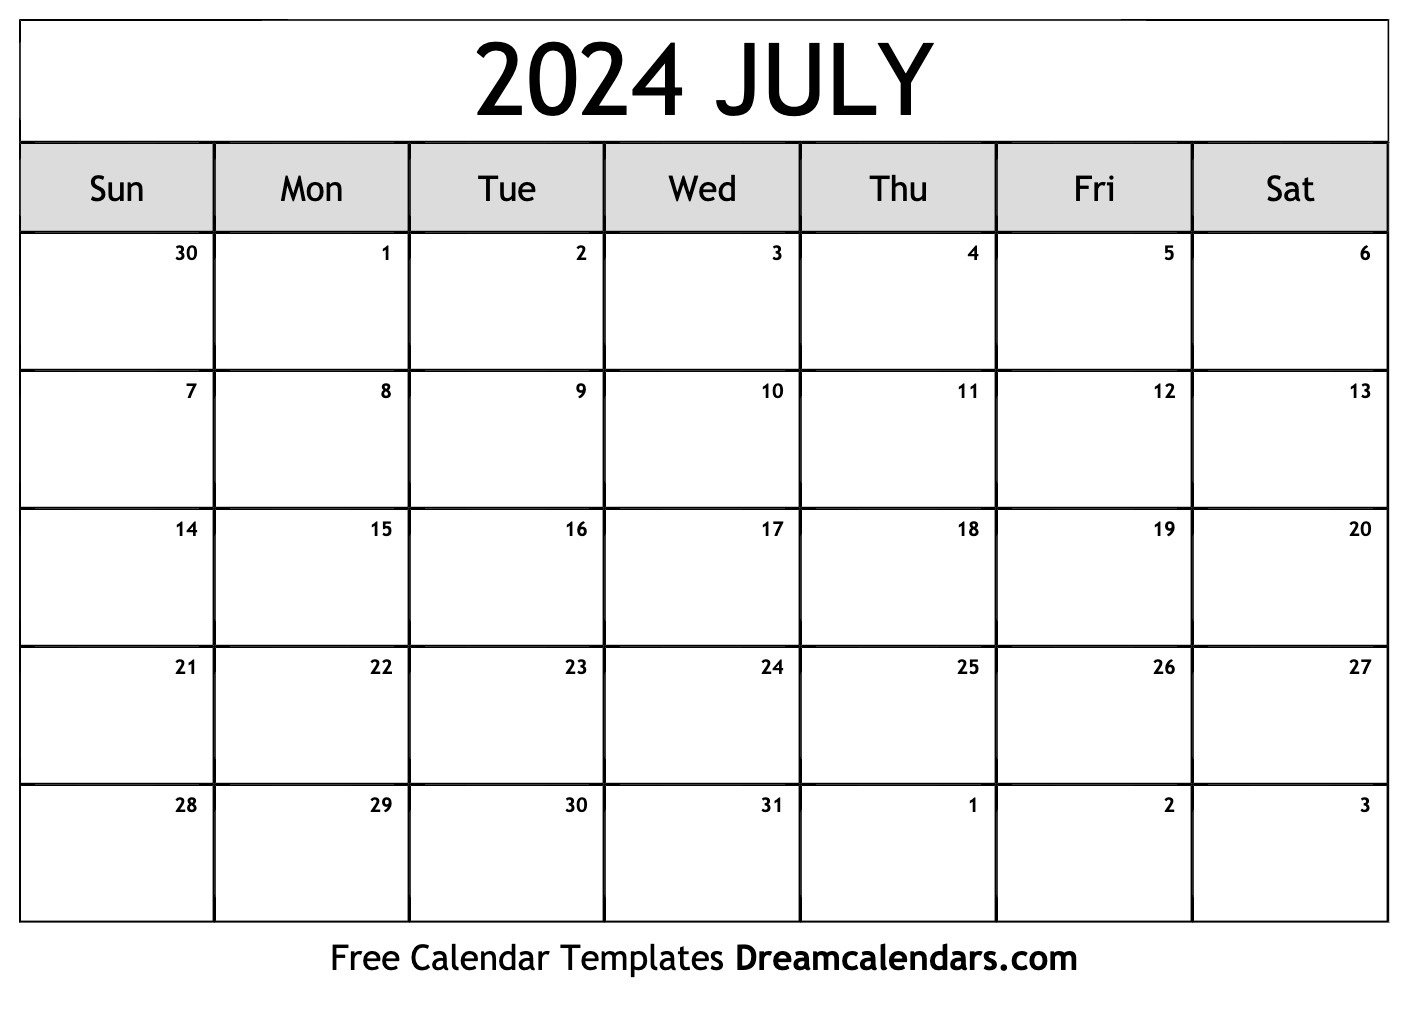 July 2024 Calendar - Free Printable With Holidays And Observances with regard to Template For July 2024 Calendar